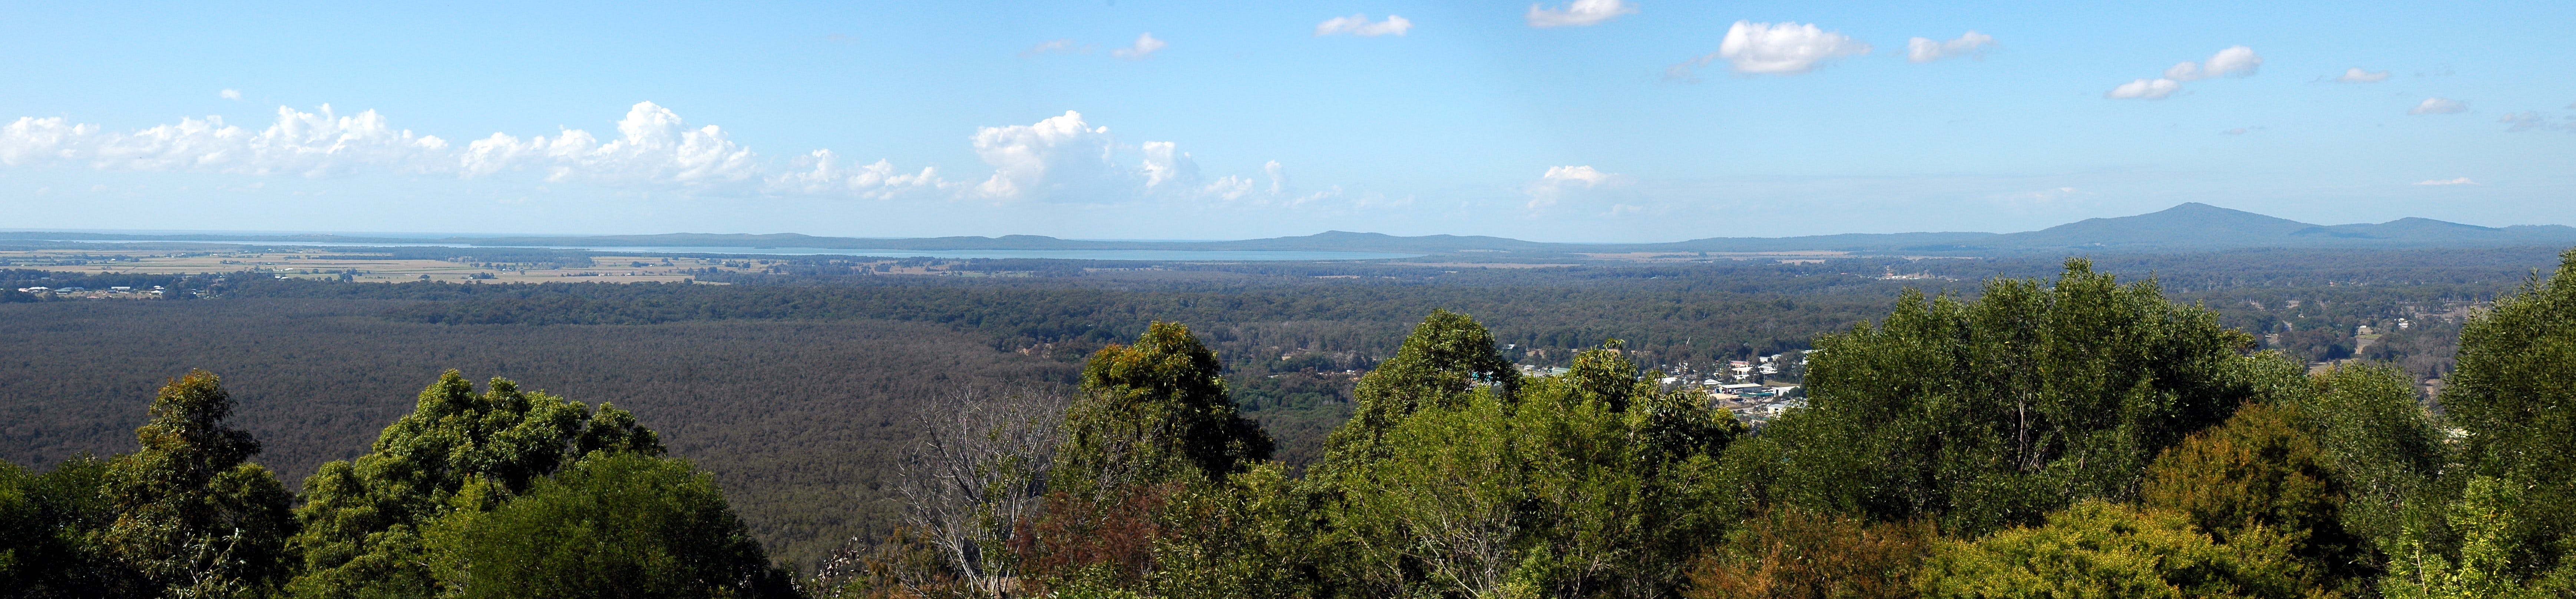 Maclean Lookout - Find Attractions